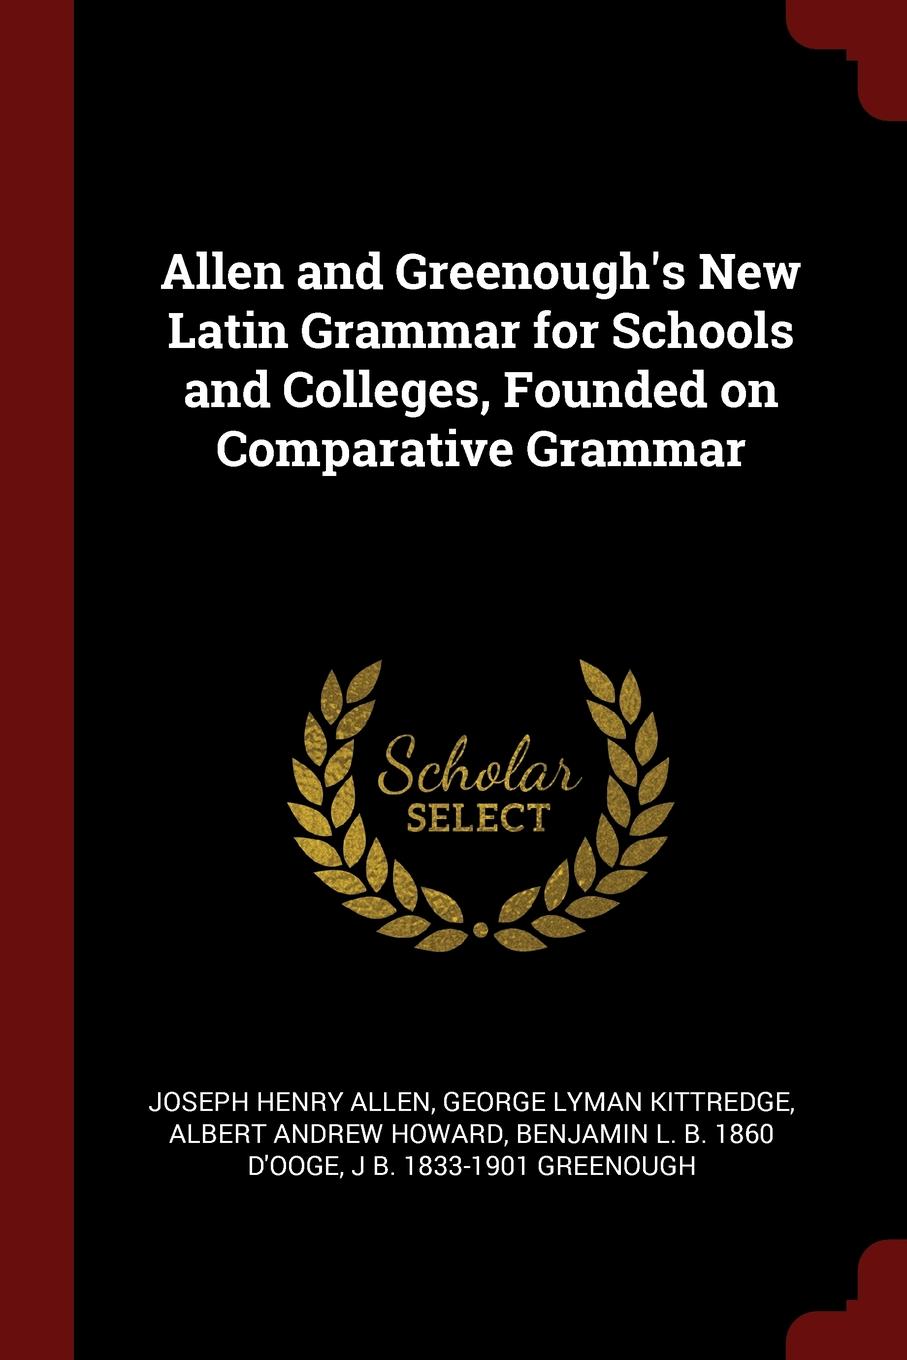 Allen and Greenough.s New Latin Grammar for Schools and Colleges, Founded on Comparative Grammar